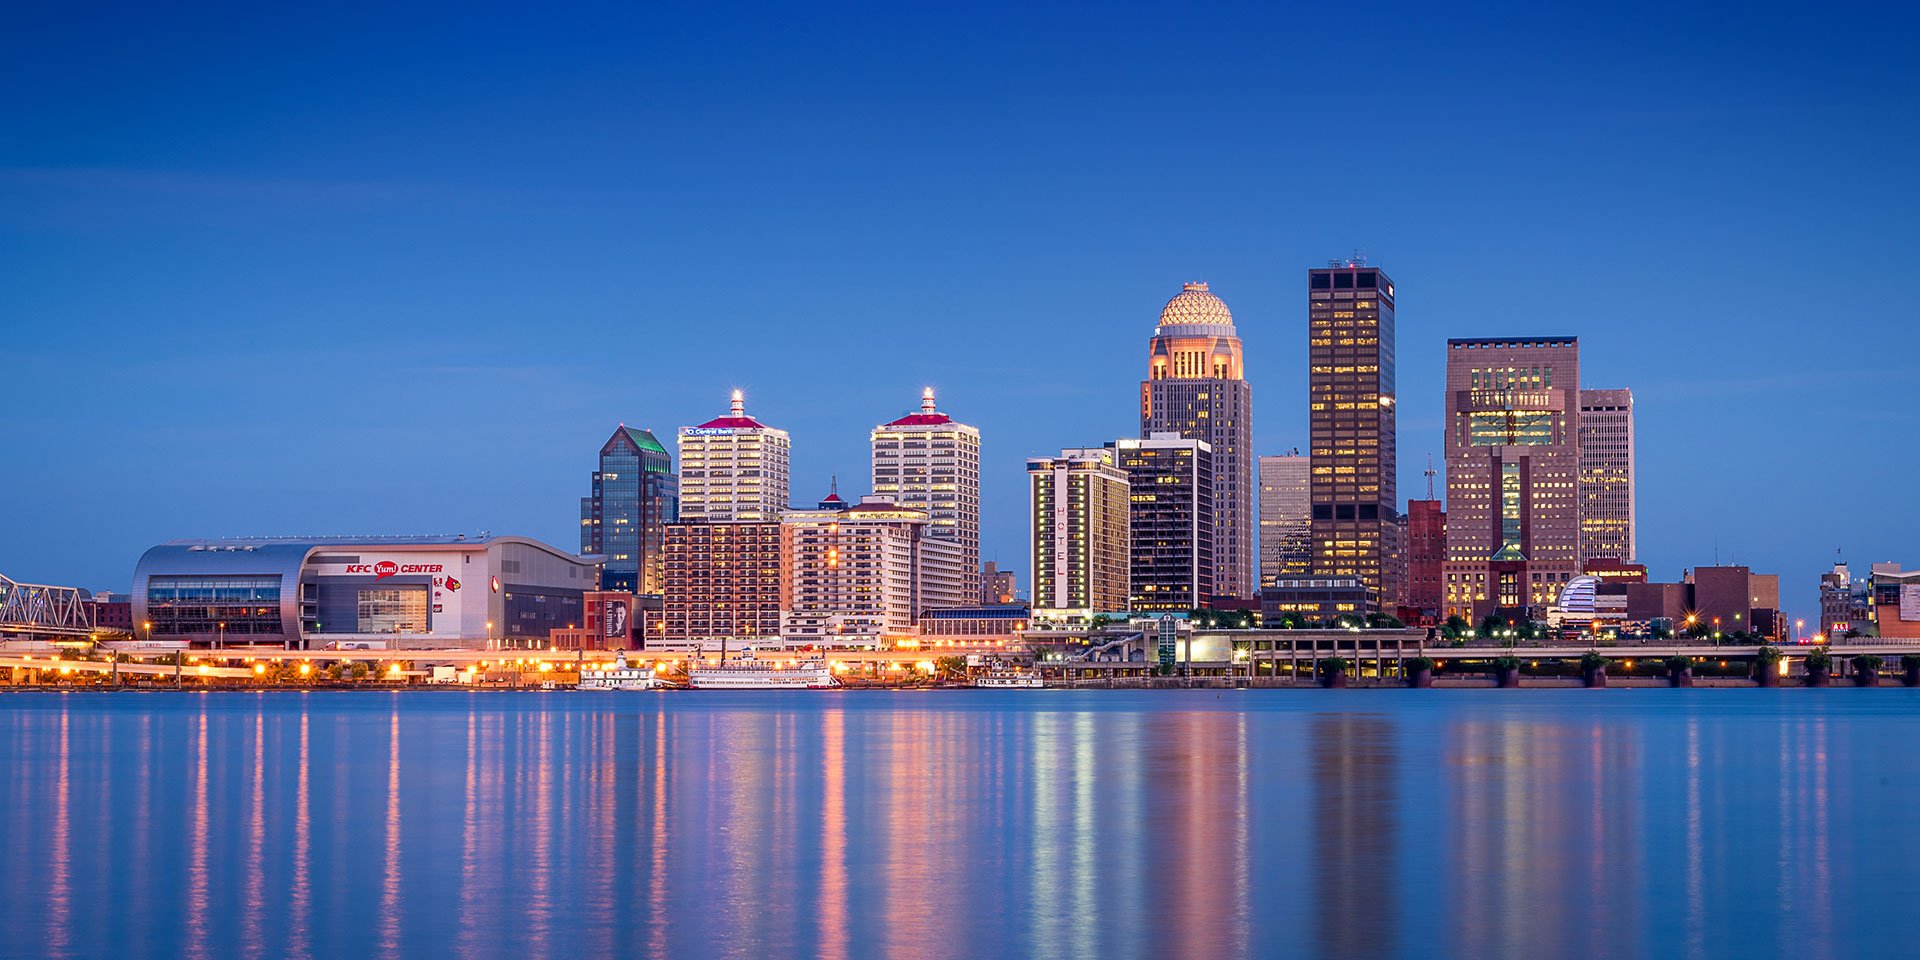 Photograph of downtown Louisville skyline at night